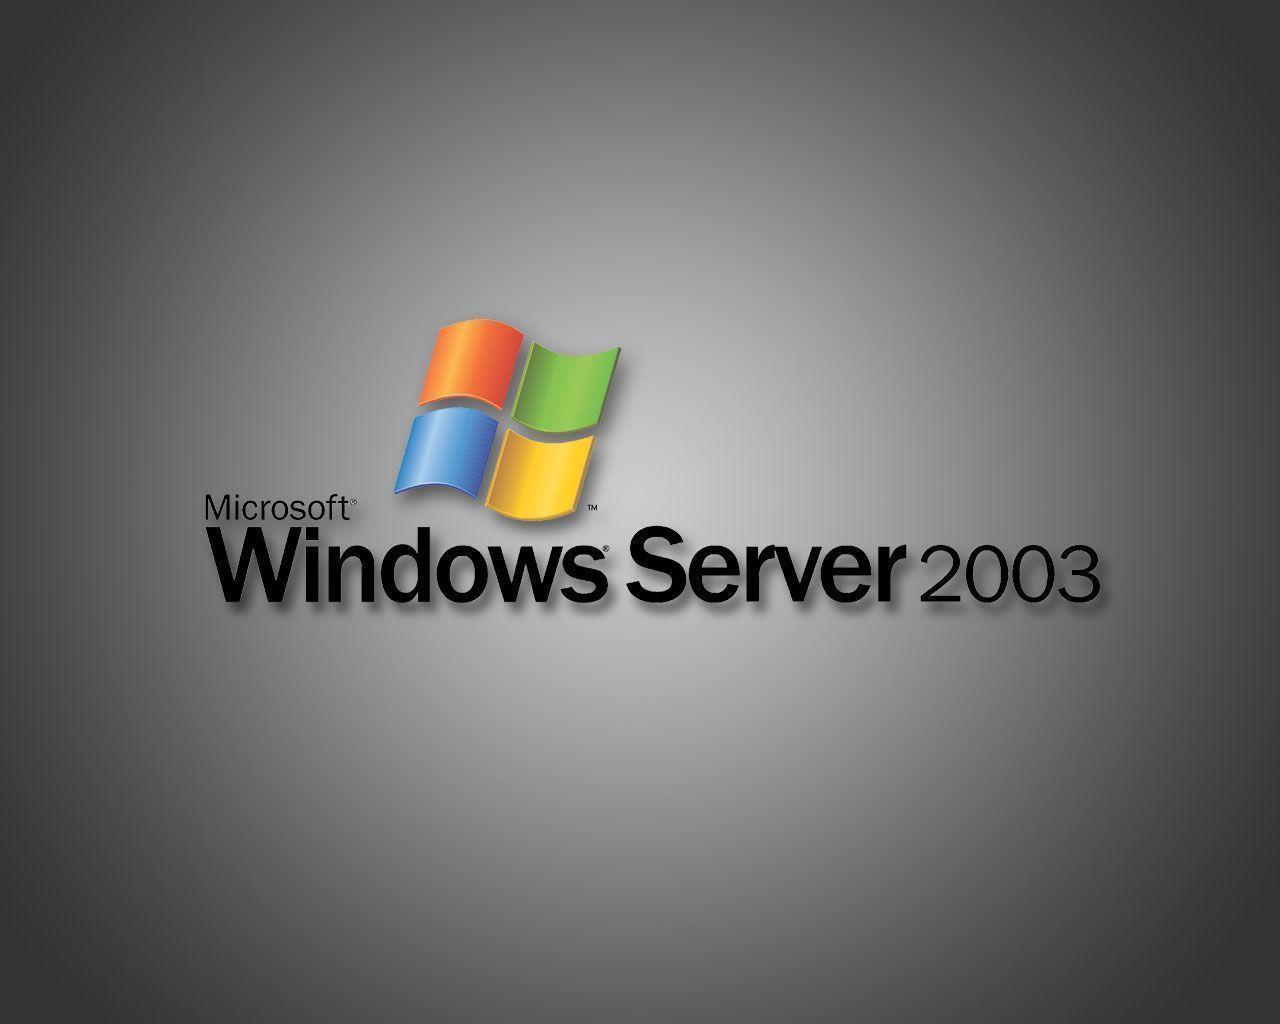 Plan Ahead: Windows Server 2003 Support Ends in 2015